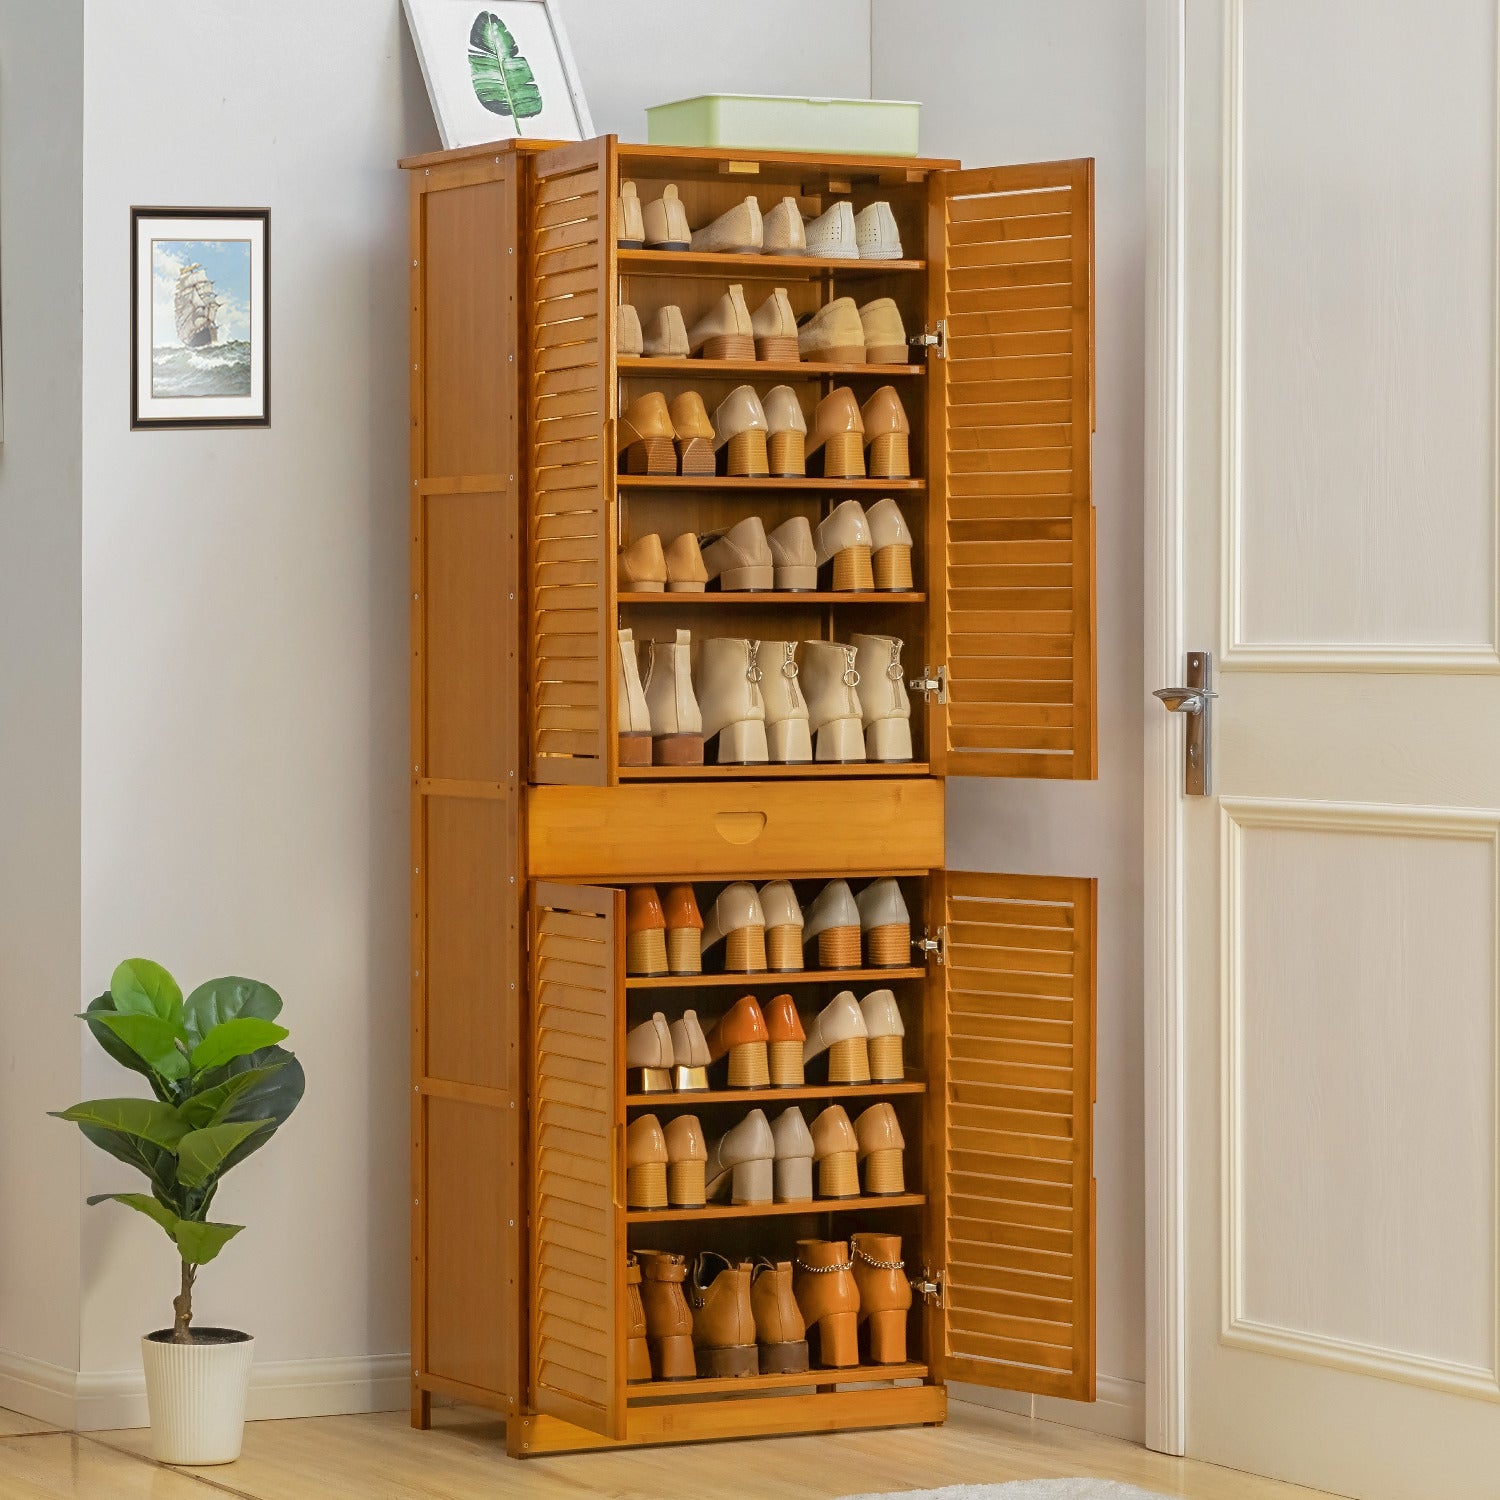 Shoe Cabinet With Doors - VisualHunt